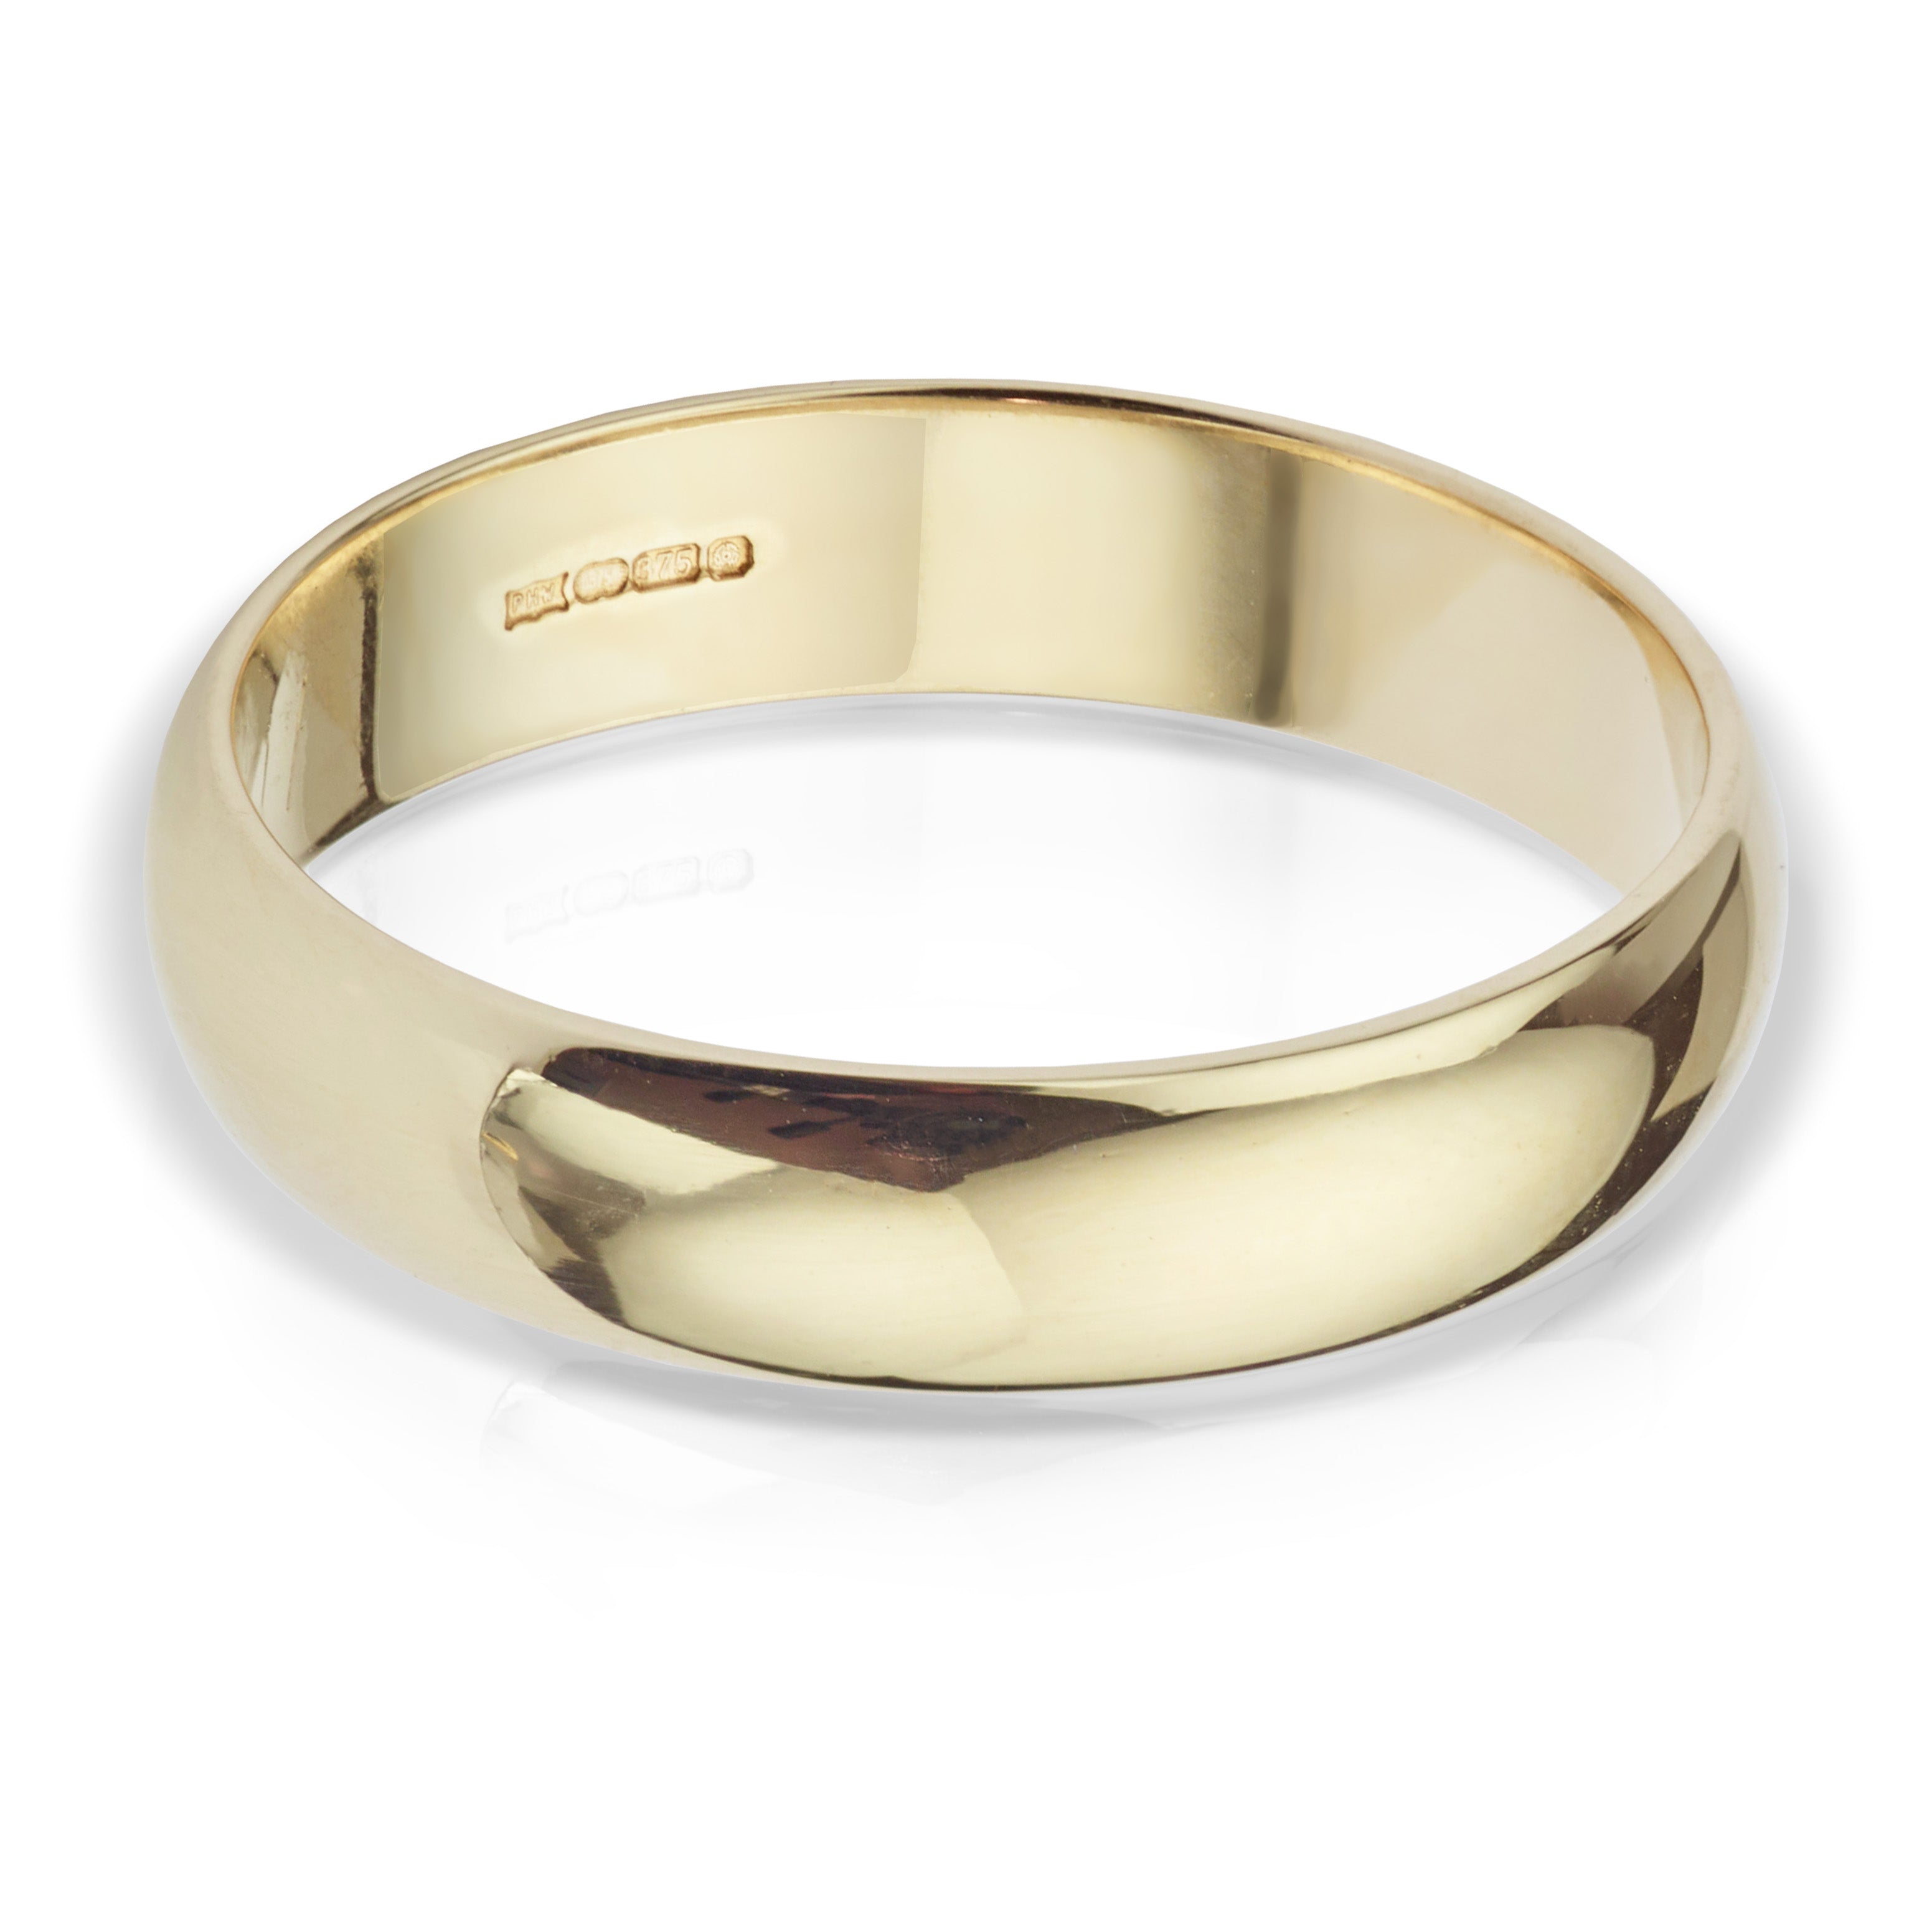 Side view of the pre-owned 5mm yellow gold wedding ring